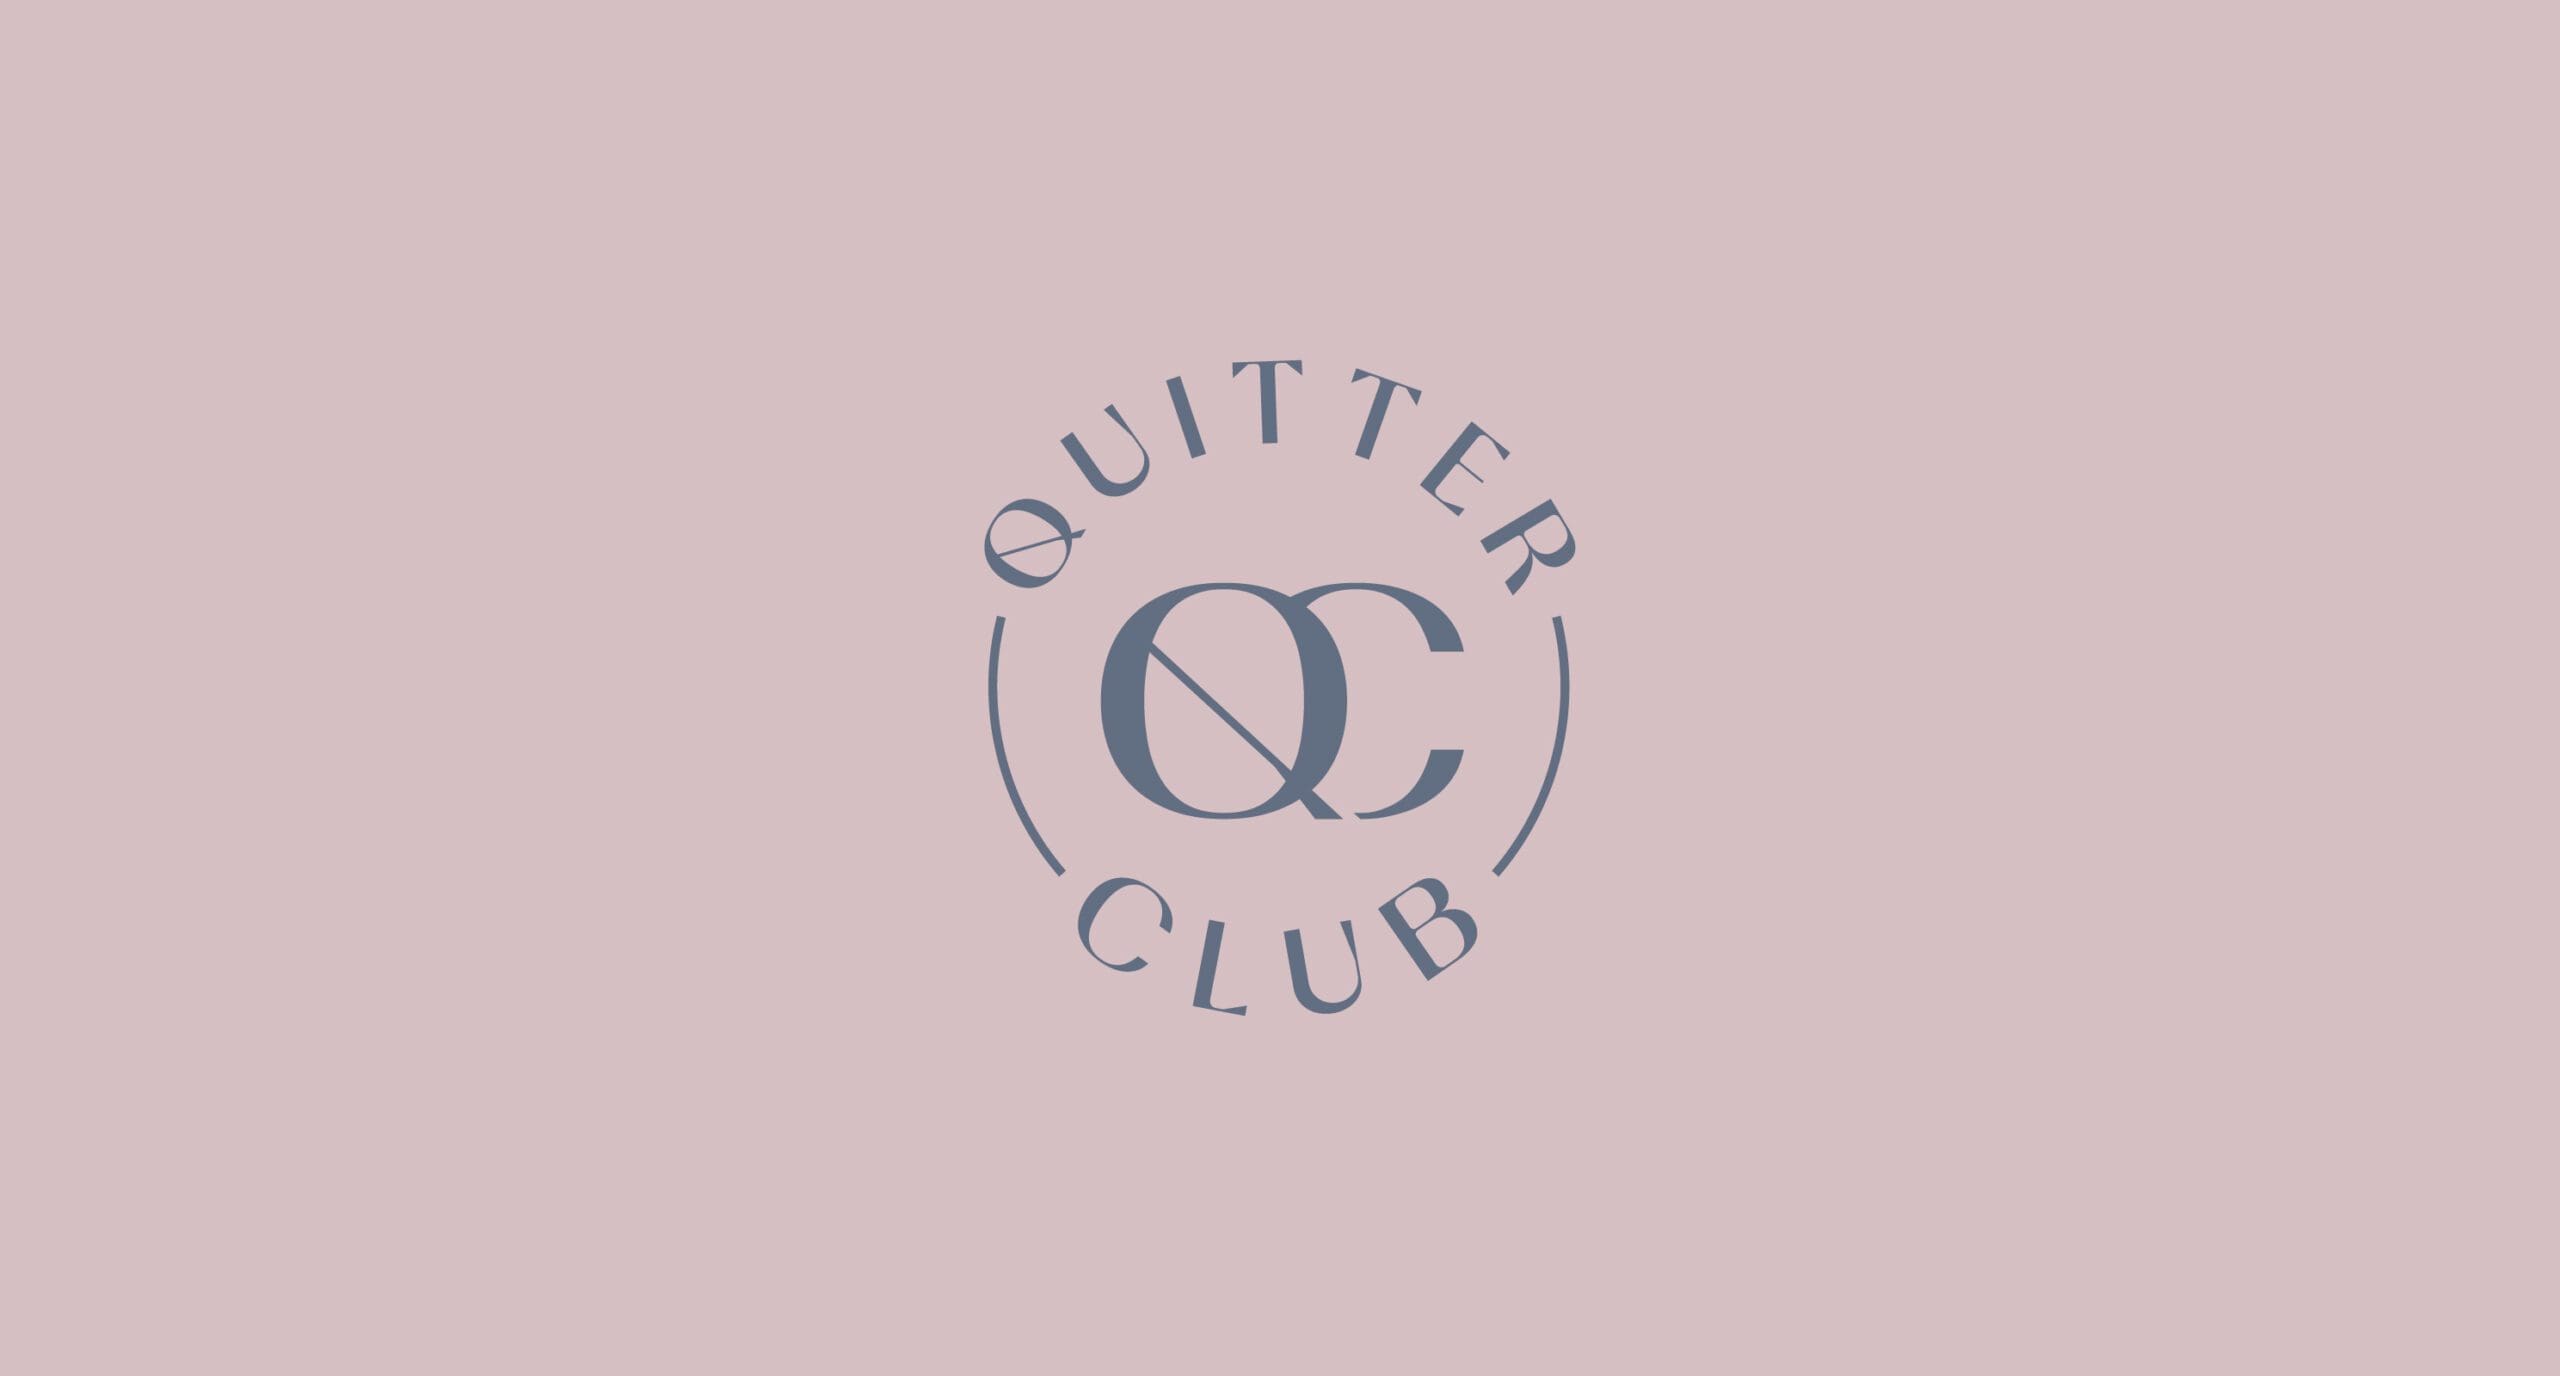 Ep. 230: The Quitter Club